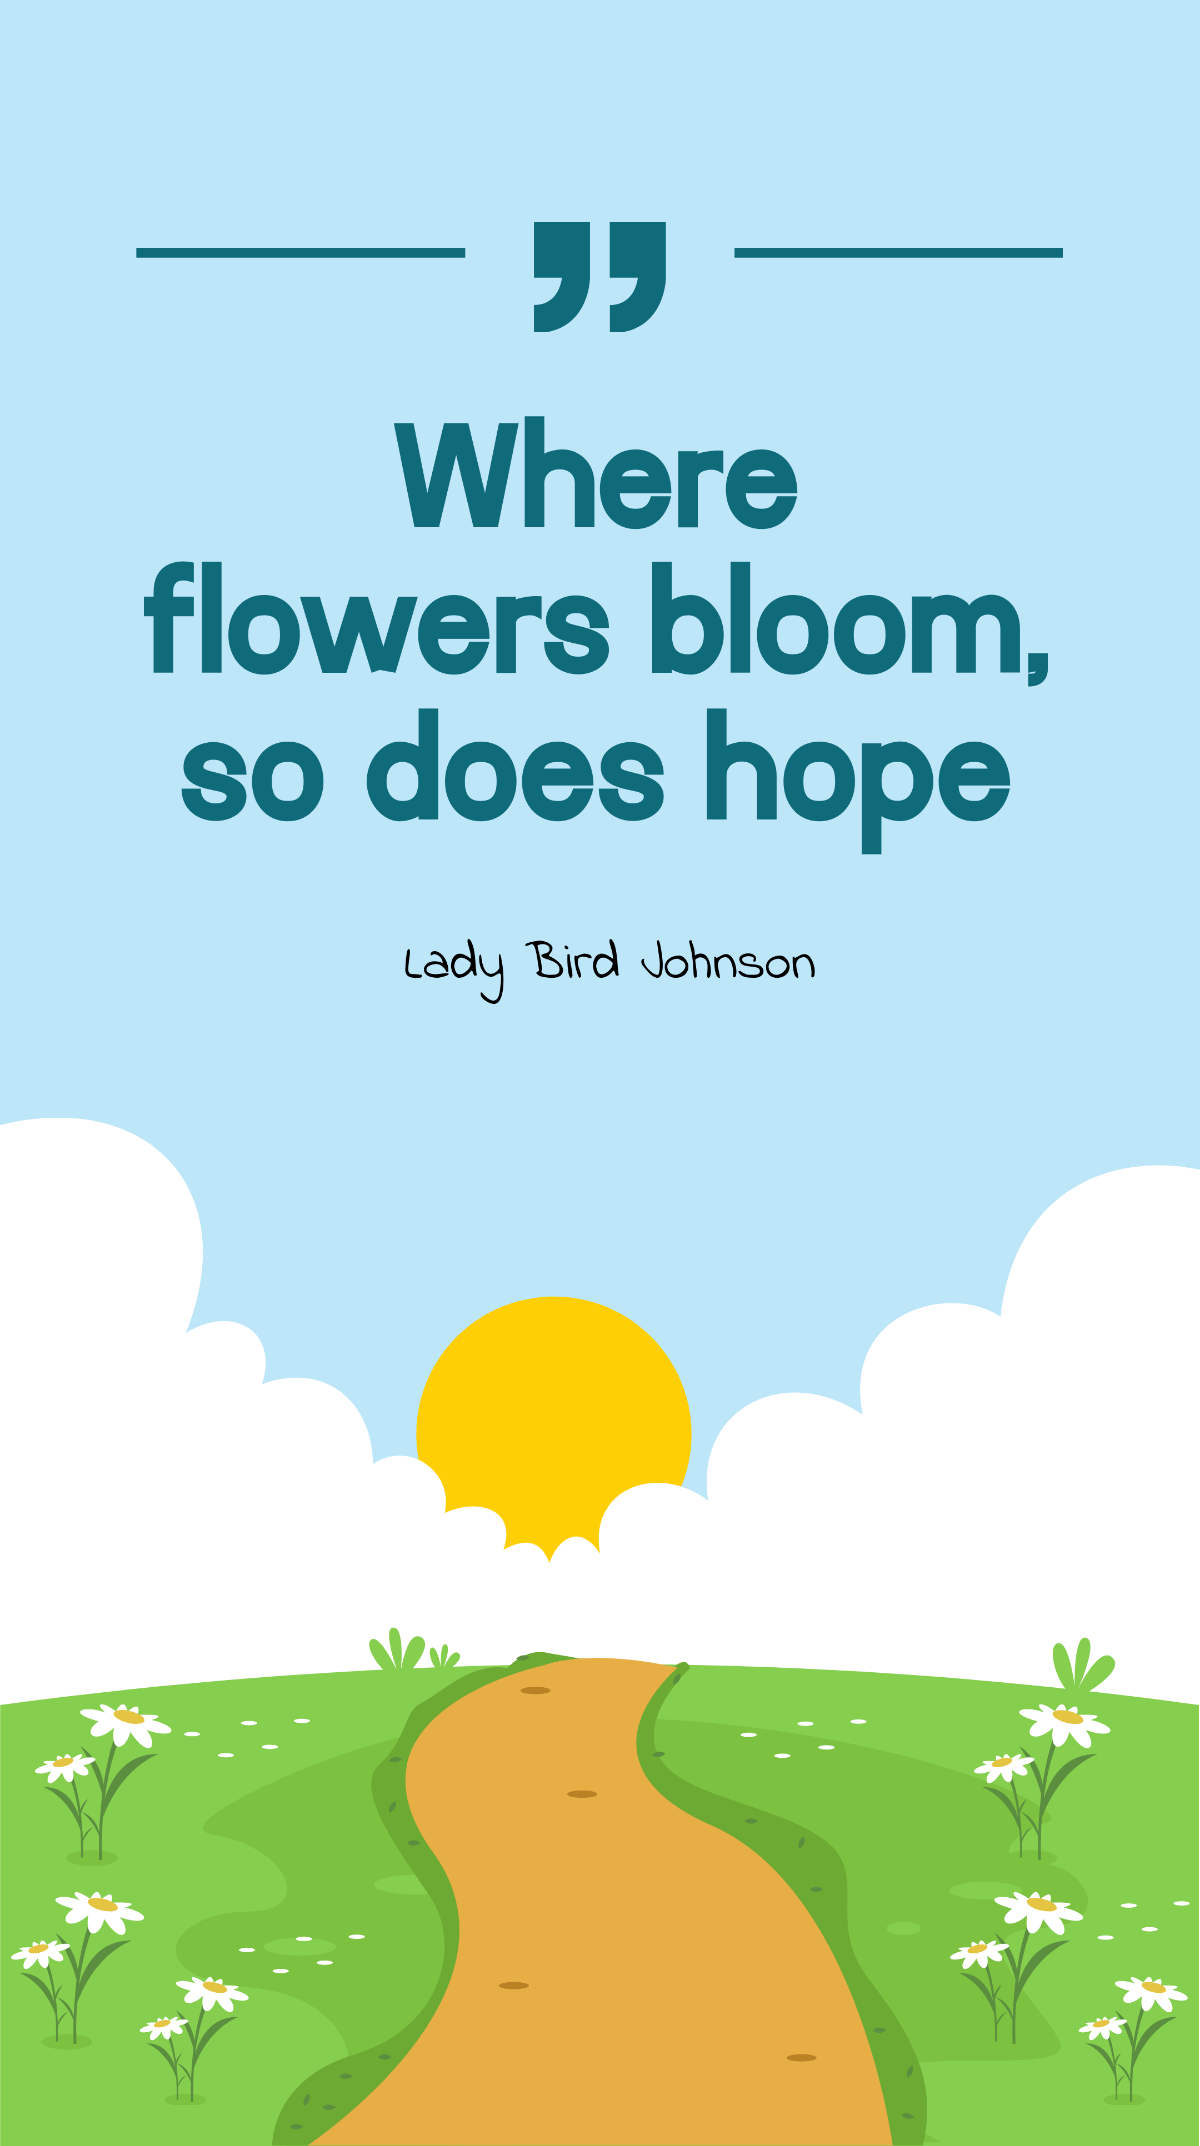 Lady Bird Johnson - Where flowers bloom, so does hope. Template